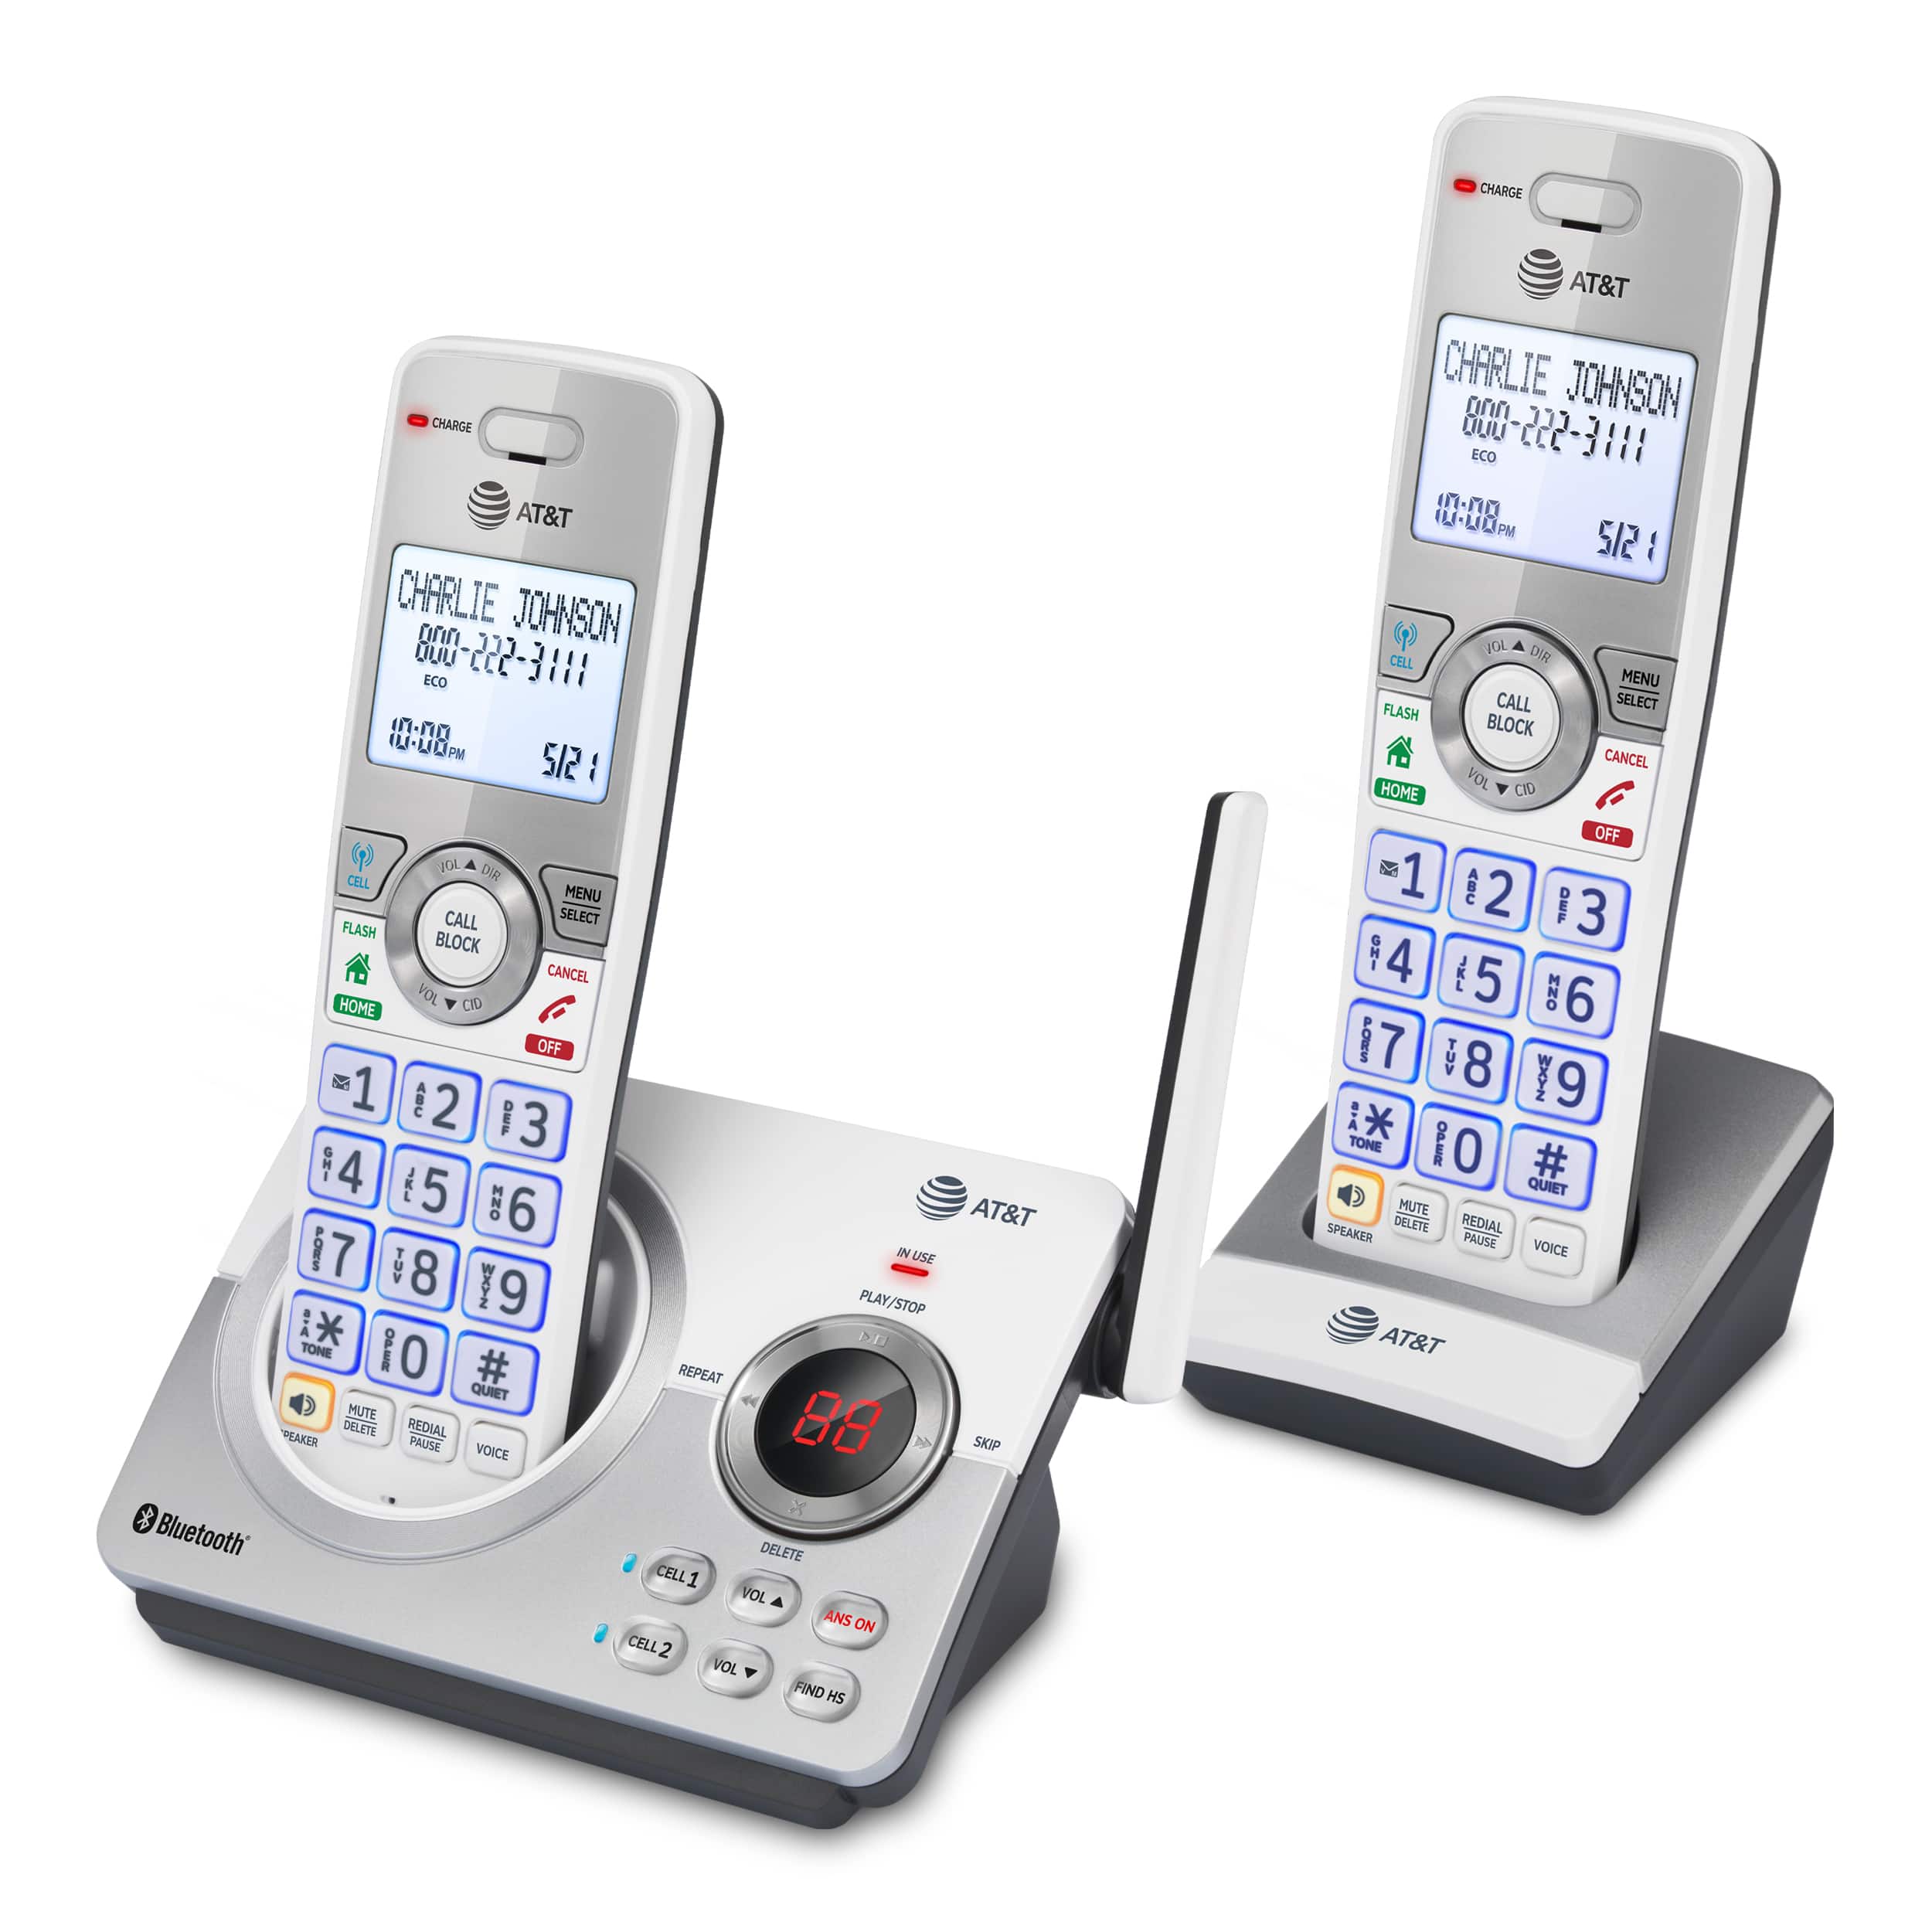 2-Handset Expandable Cordless Phone with Unsurpassed Range, Bluetooth Connect to Cell™, Smart Call Blocker and Answering System, DL72210 - view 3